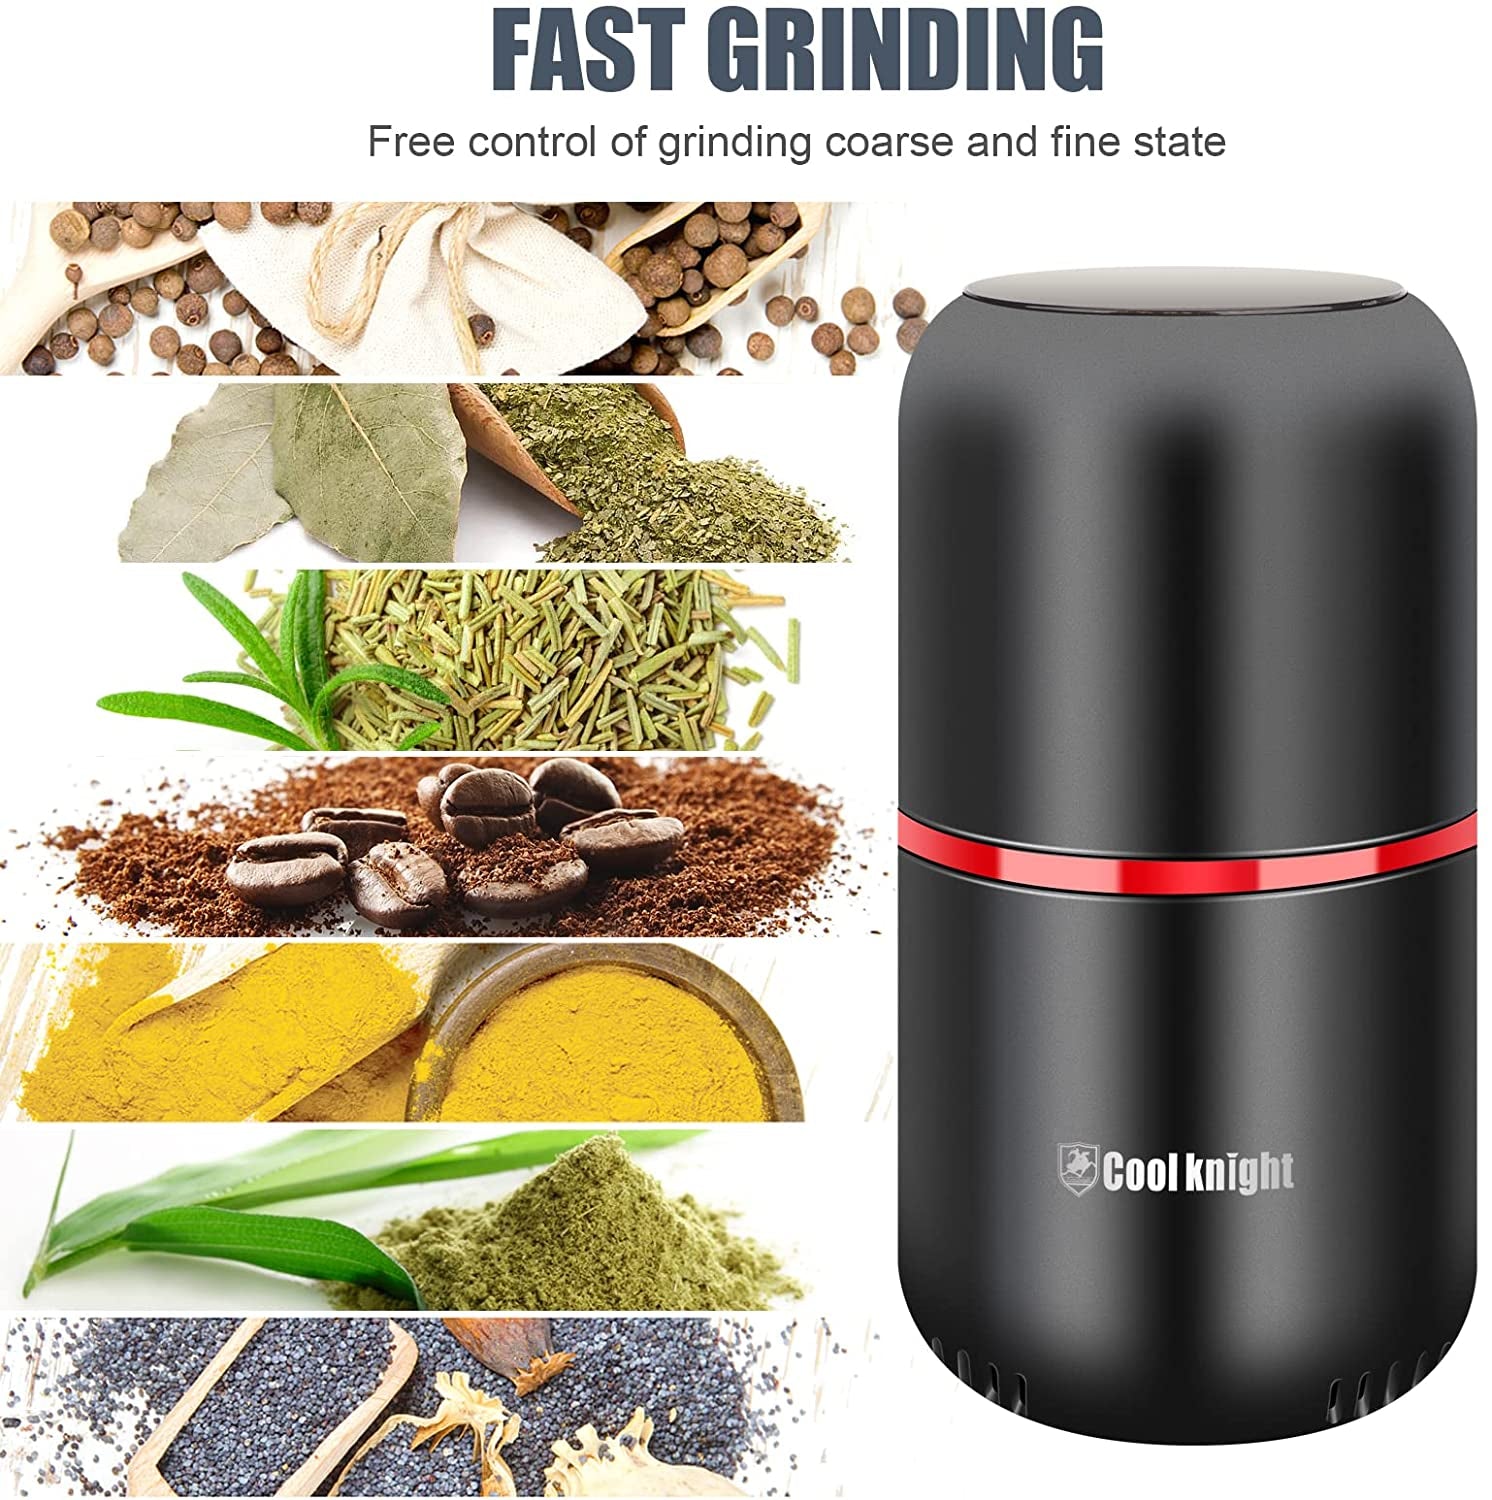 Large Capacity Electric Herb, Spice, & Coffee Grinder with Pollen Catcher 